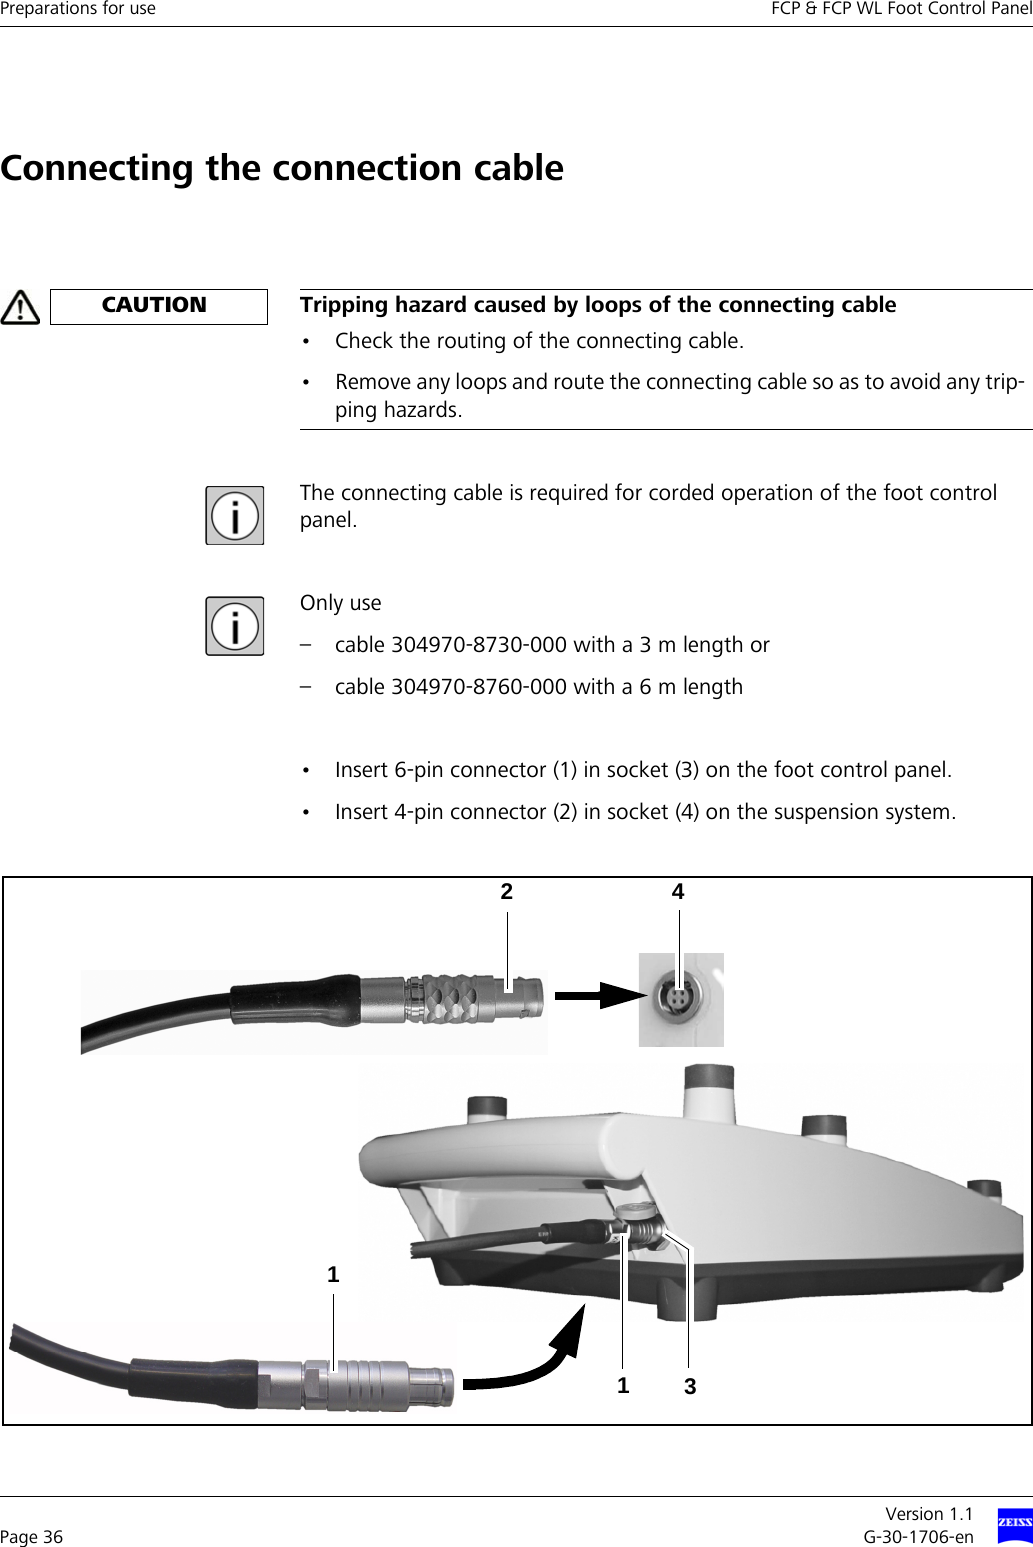 Preparations for use FCP &amp; FCP WL Foot Control PanelVersion 1.1Page 36 G-30-1706-enConnecting the connection cableThe connecting cable is required for corded operation of the foot control panel.Only use – cable 304970-8730-000 with a 3 m length or – cable 304970-8760-000 with a 6 m length• Insert 6-pin connector (1) in socket (3) on the foot control panel.• Insert 4-pin connector (2) in socket (4) on the suspension system.CAUTION Tripping hazard caused by loops of the connecting cable• Check the routing of the connecting cable.• Remove any loops and route the connecting cable so as to avoid any trip-ping hazards.13214